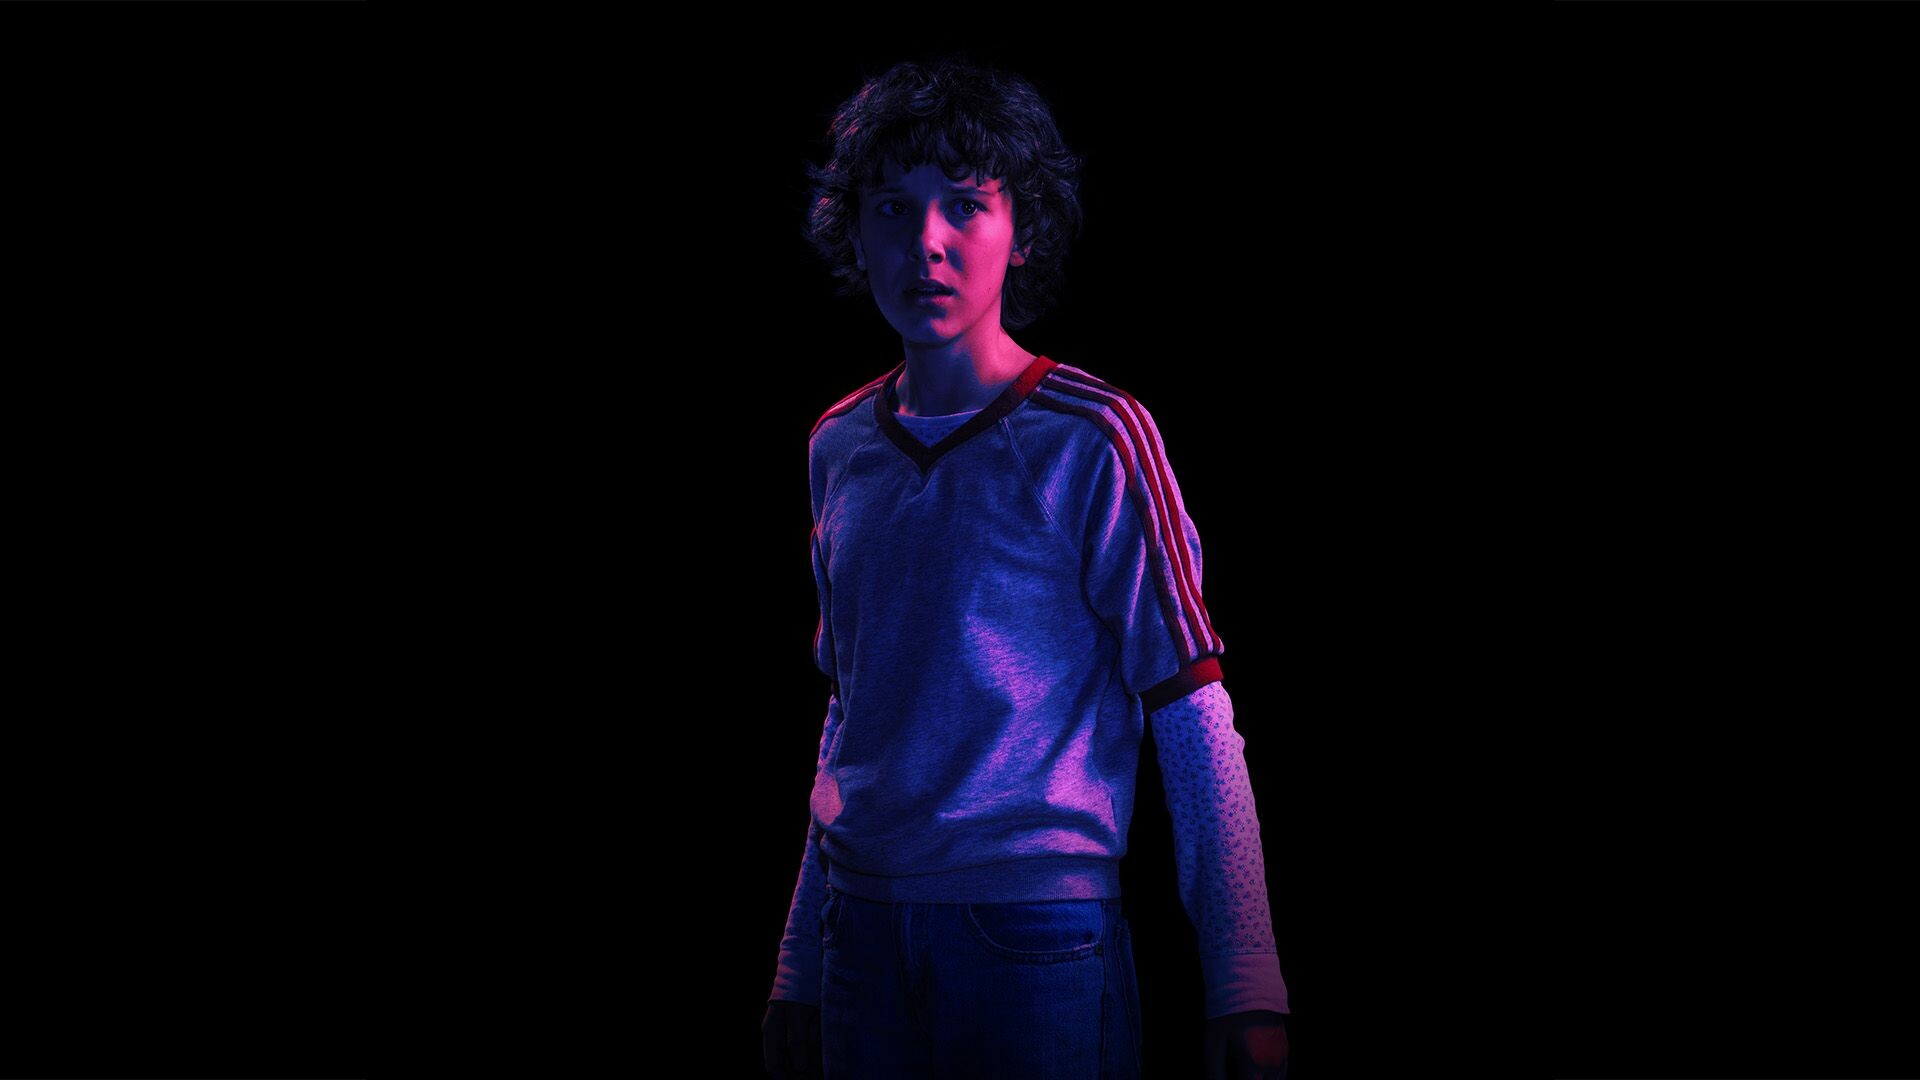 Stranger Things: Eleven, one of Dr. Brenner's subjects from Hawkins National Laboratory. 1920x1080 Full HD Wallpaper.